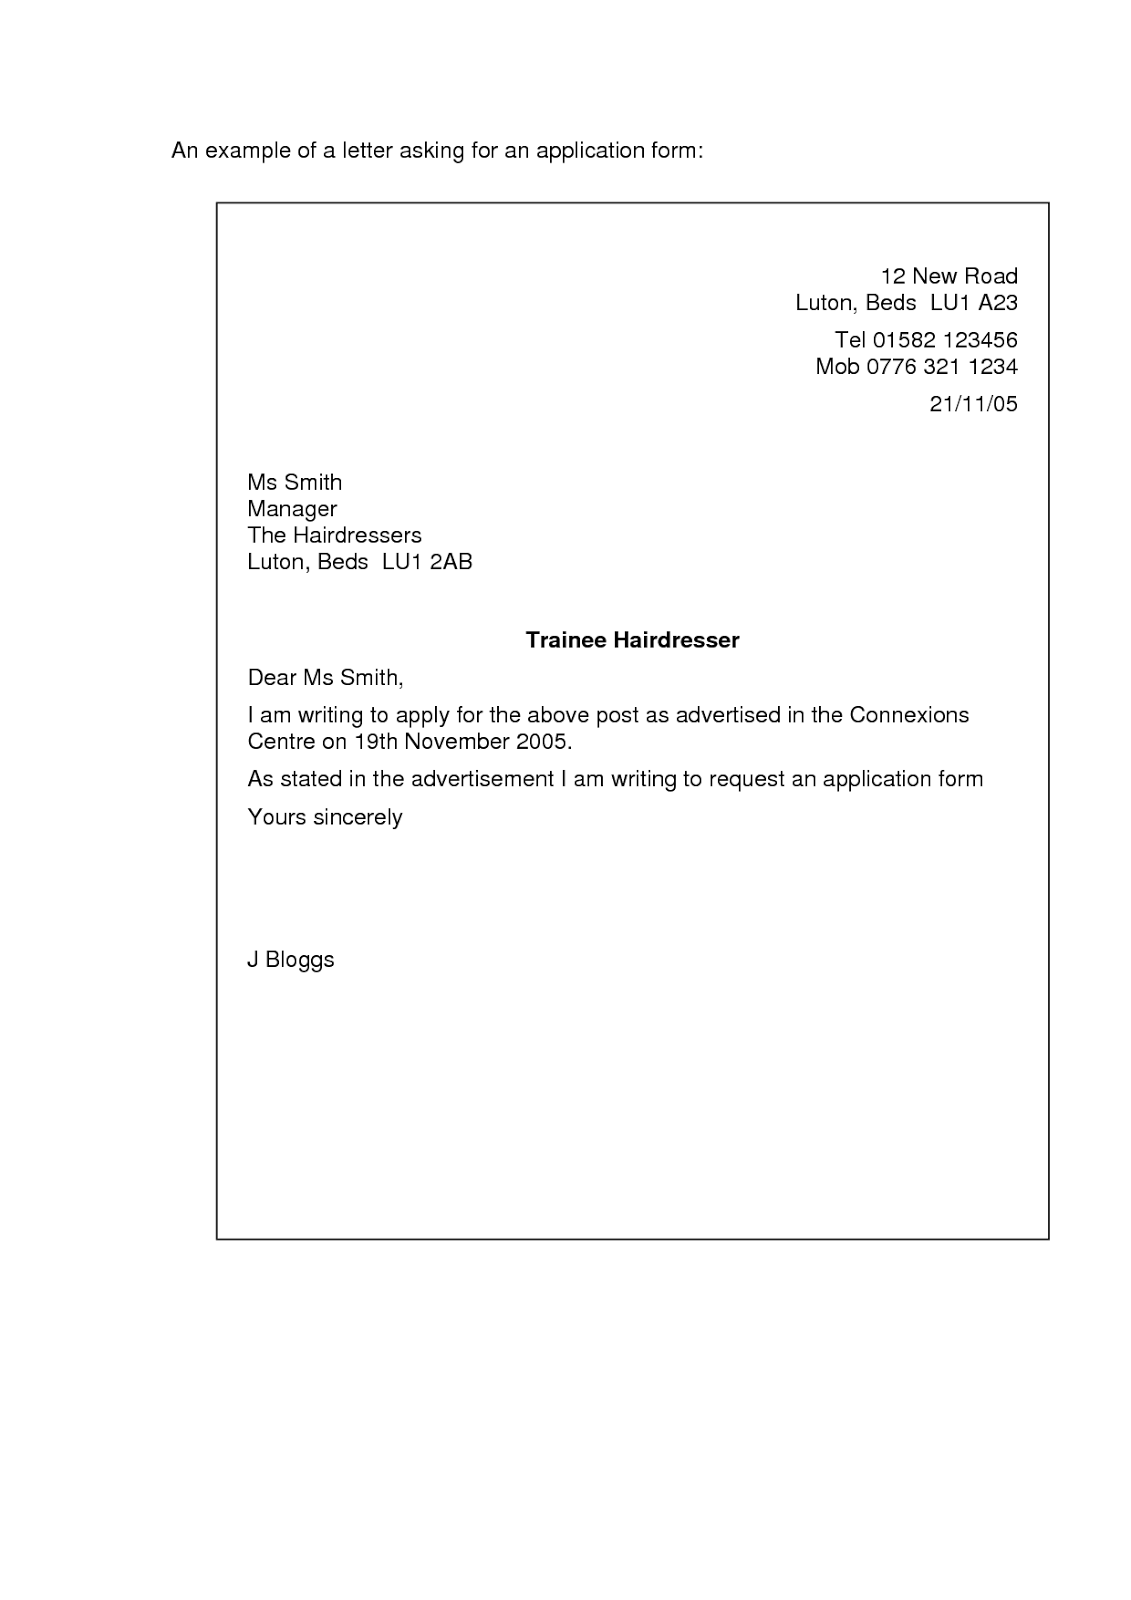 An application letter for a job an example